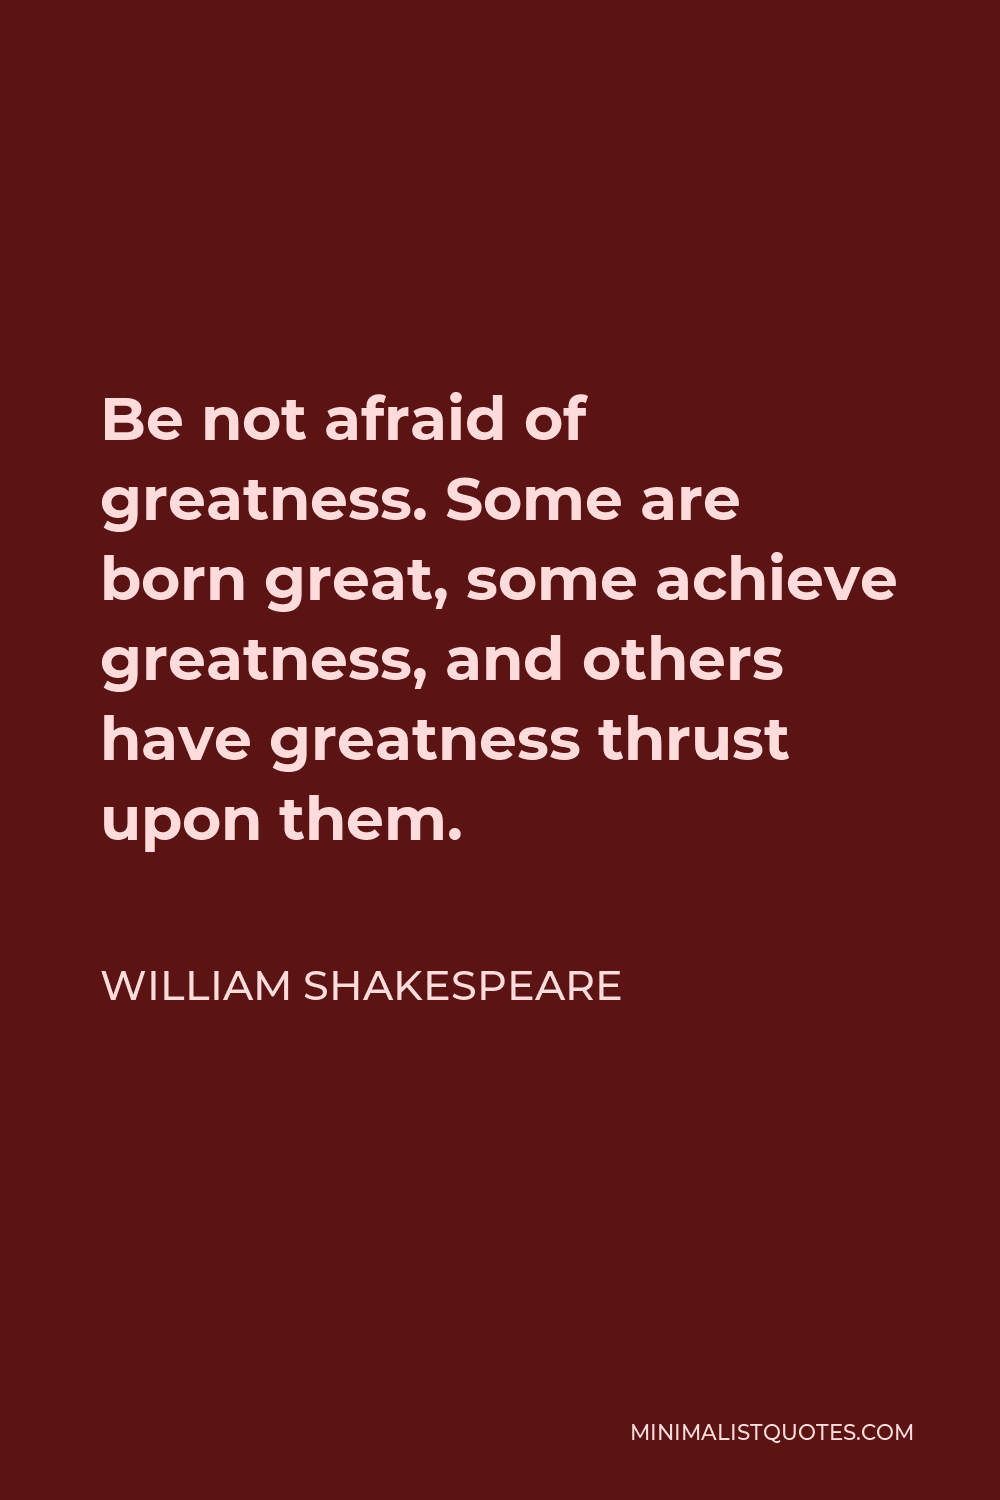 William Shakespeare Quote - Be not afraid of greatness. Some are born great, some achieve greatness, and others have greatness thrust upon them.